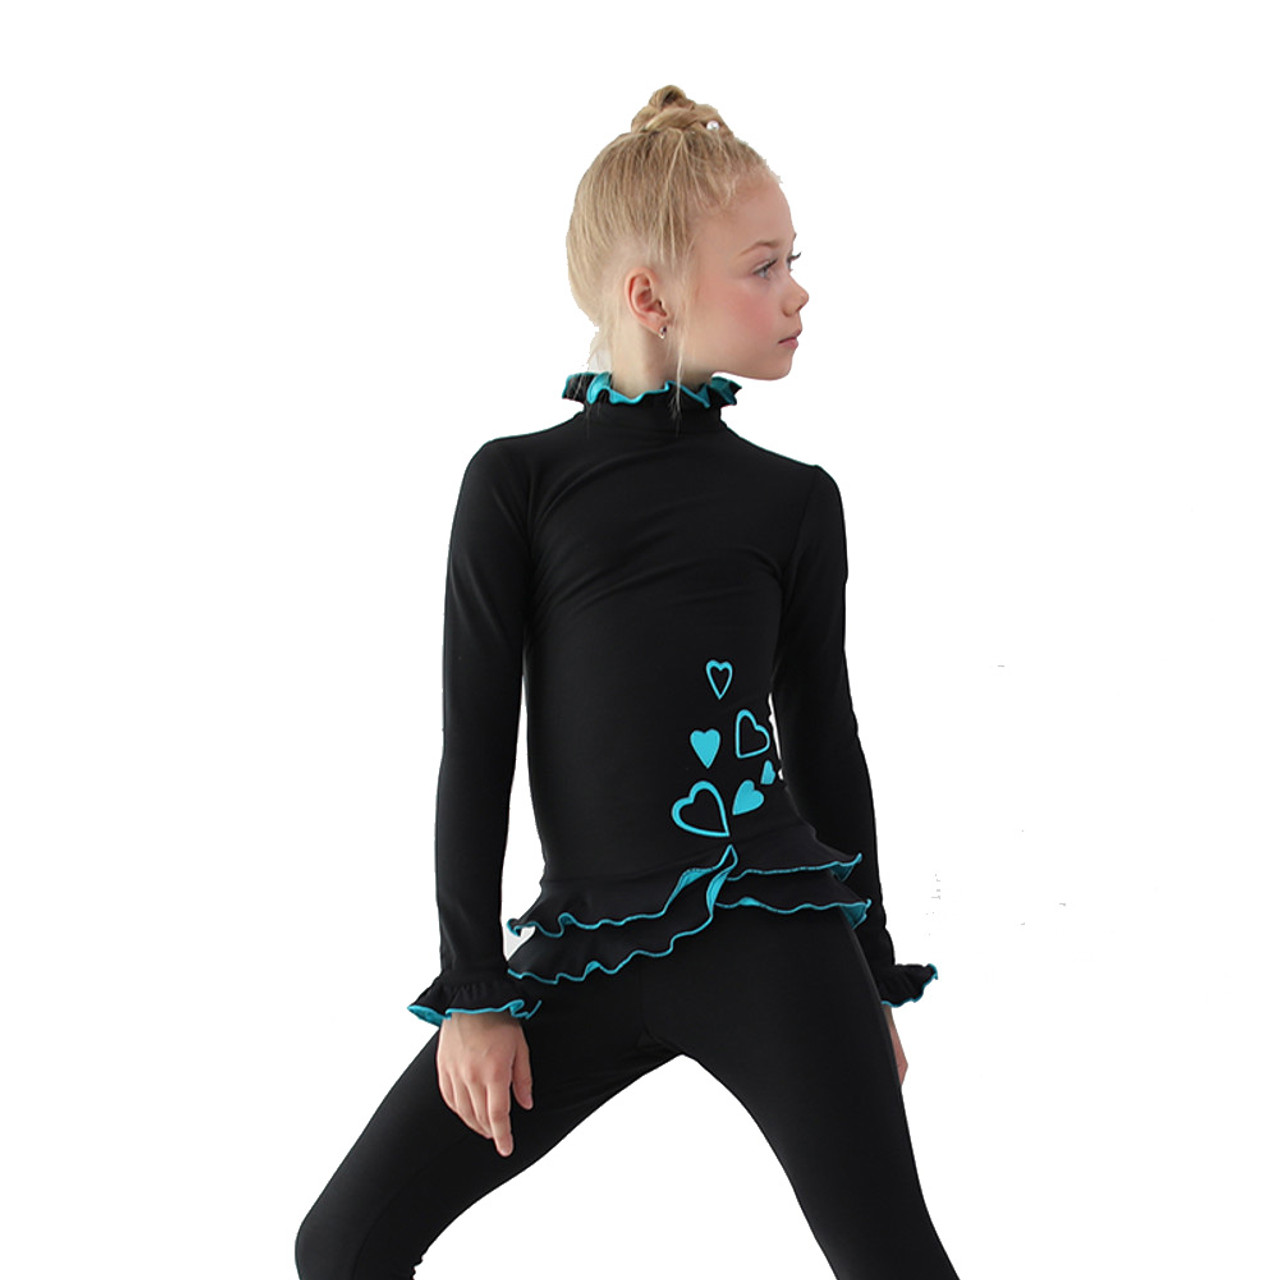 IceDress Figure Skating Outfit - Thermal - Minx (Black with Turquoise)